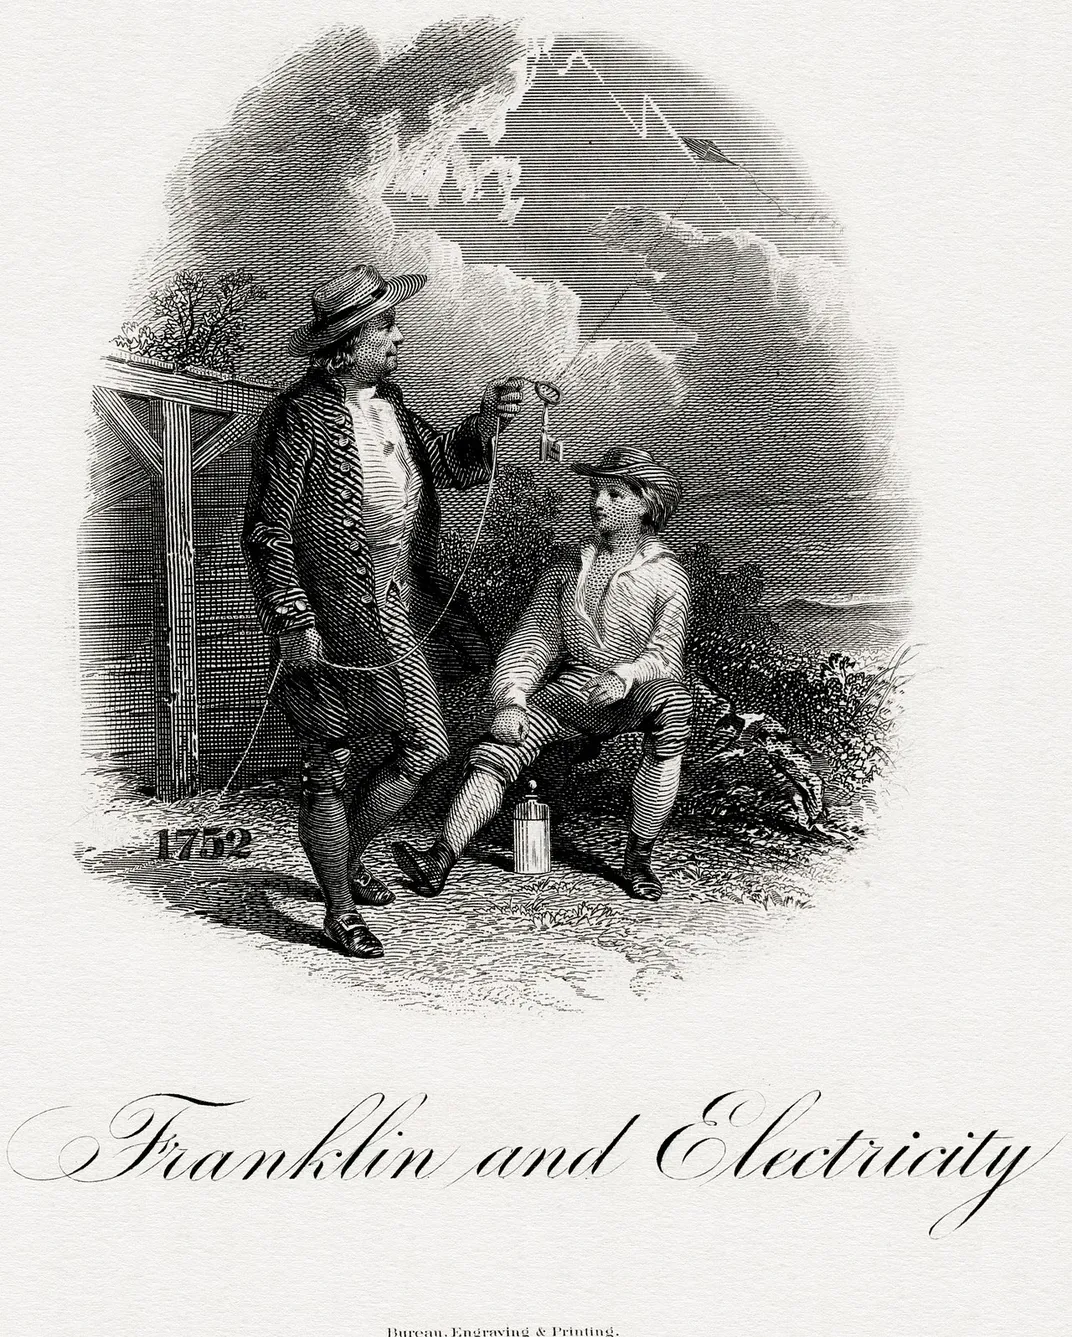 When Benjamin Franklin Shocked Himself While Attempting to Electrocute a Turkey